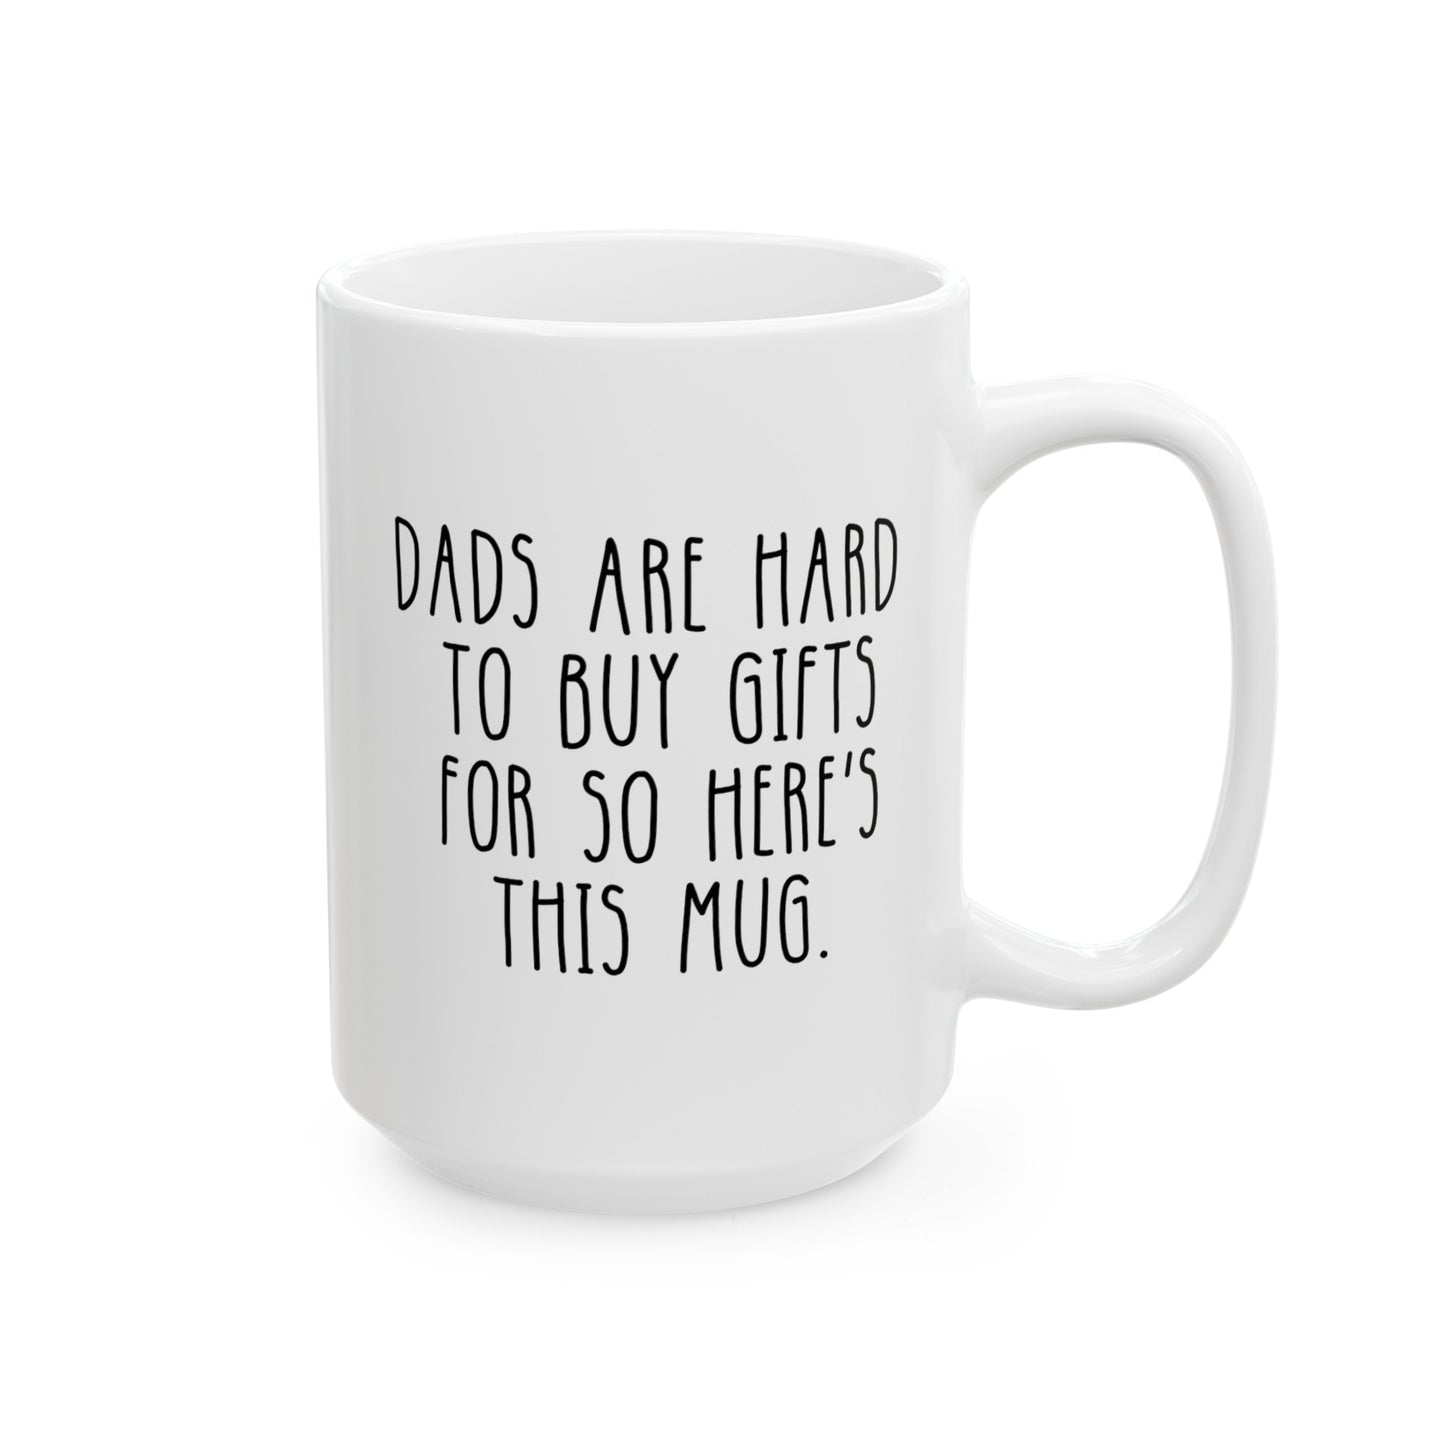 Dads Are Hard To Buy Gifts For So Here's This Mug 15oz white funny large coffee mug gift for father's day dad stepdad cute waveywares wavey wares wavywares wavy wares